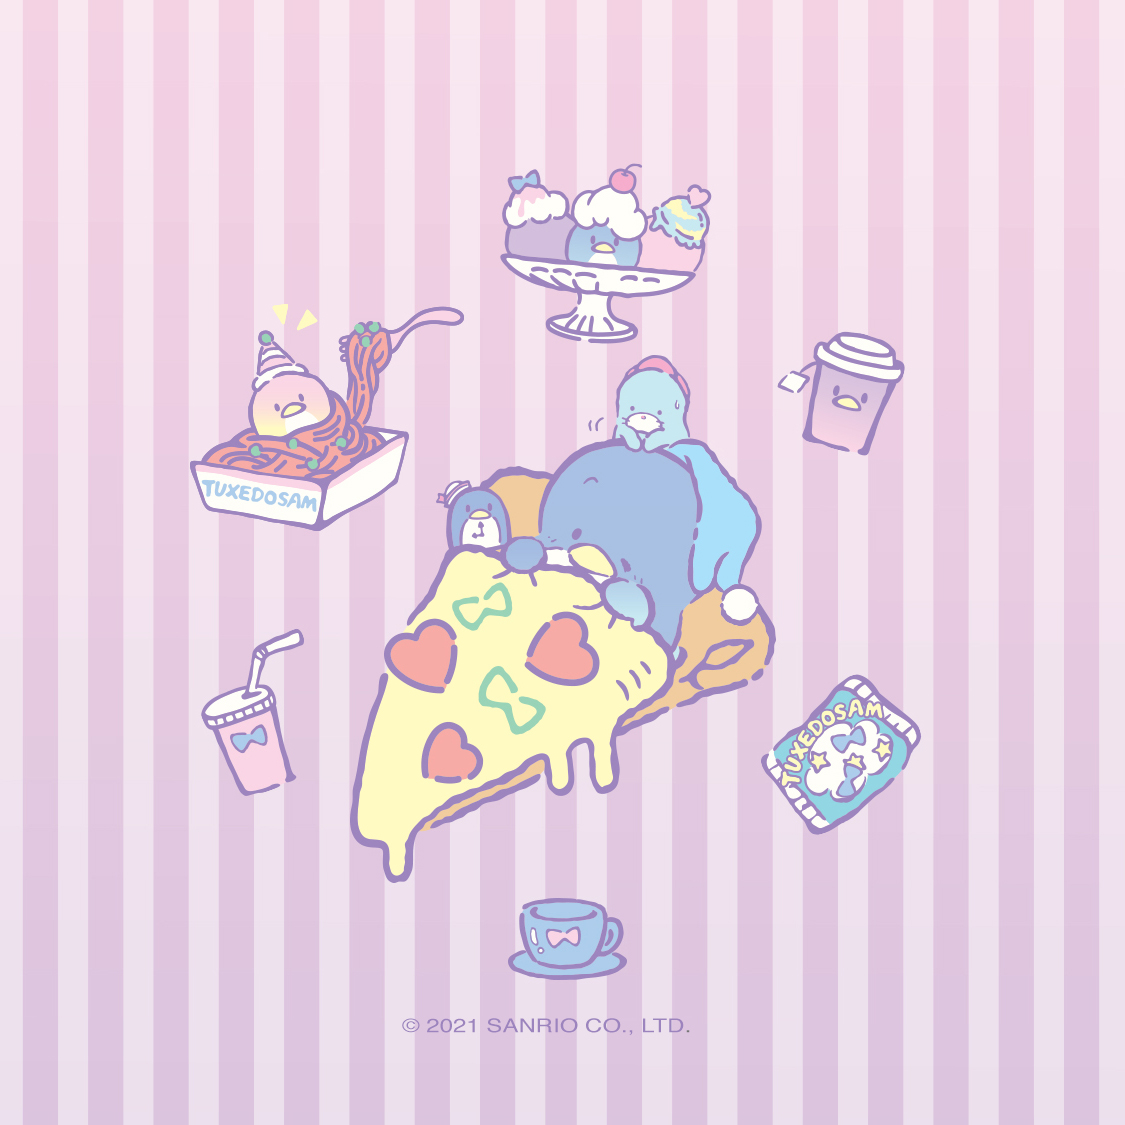 Sanrio na Twitteru: Take #Tuxedosam on the go with new background for your phone!